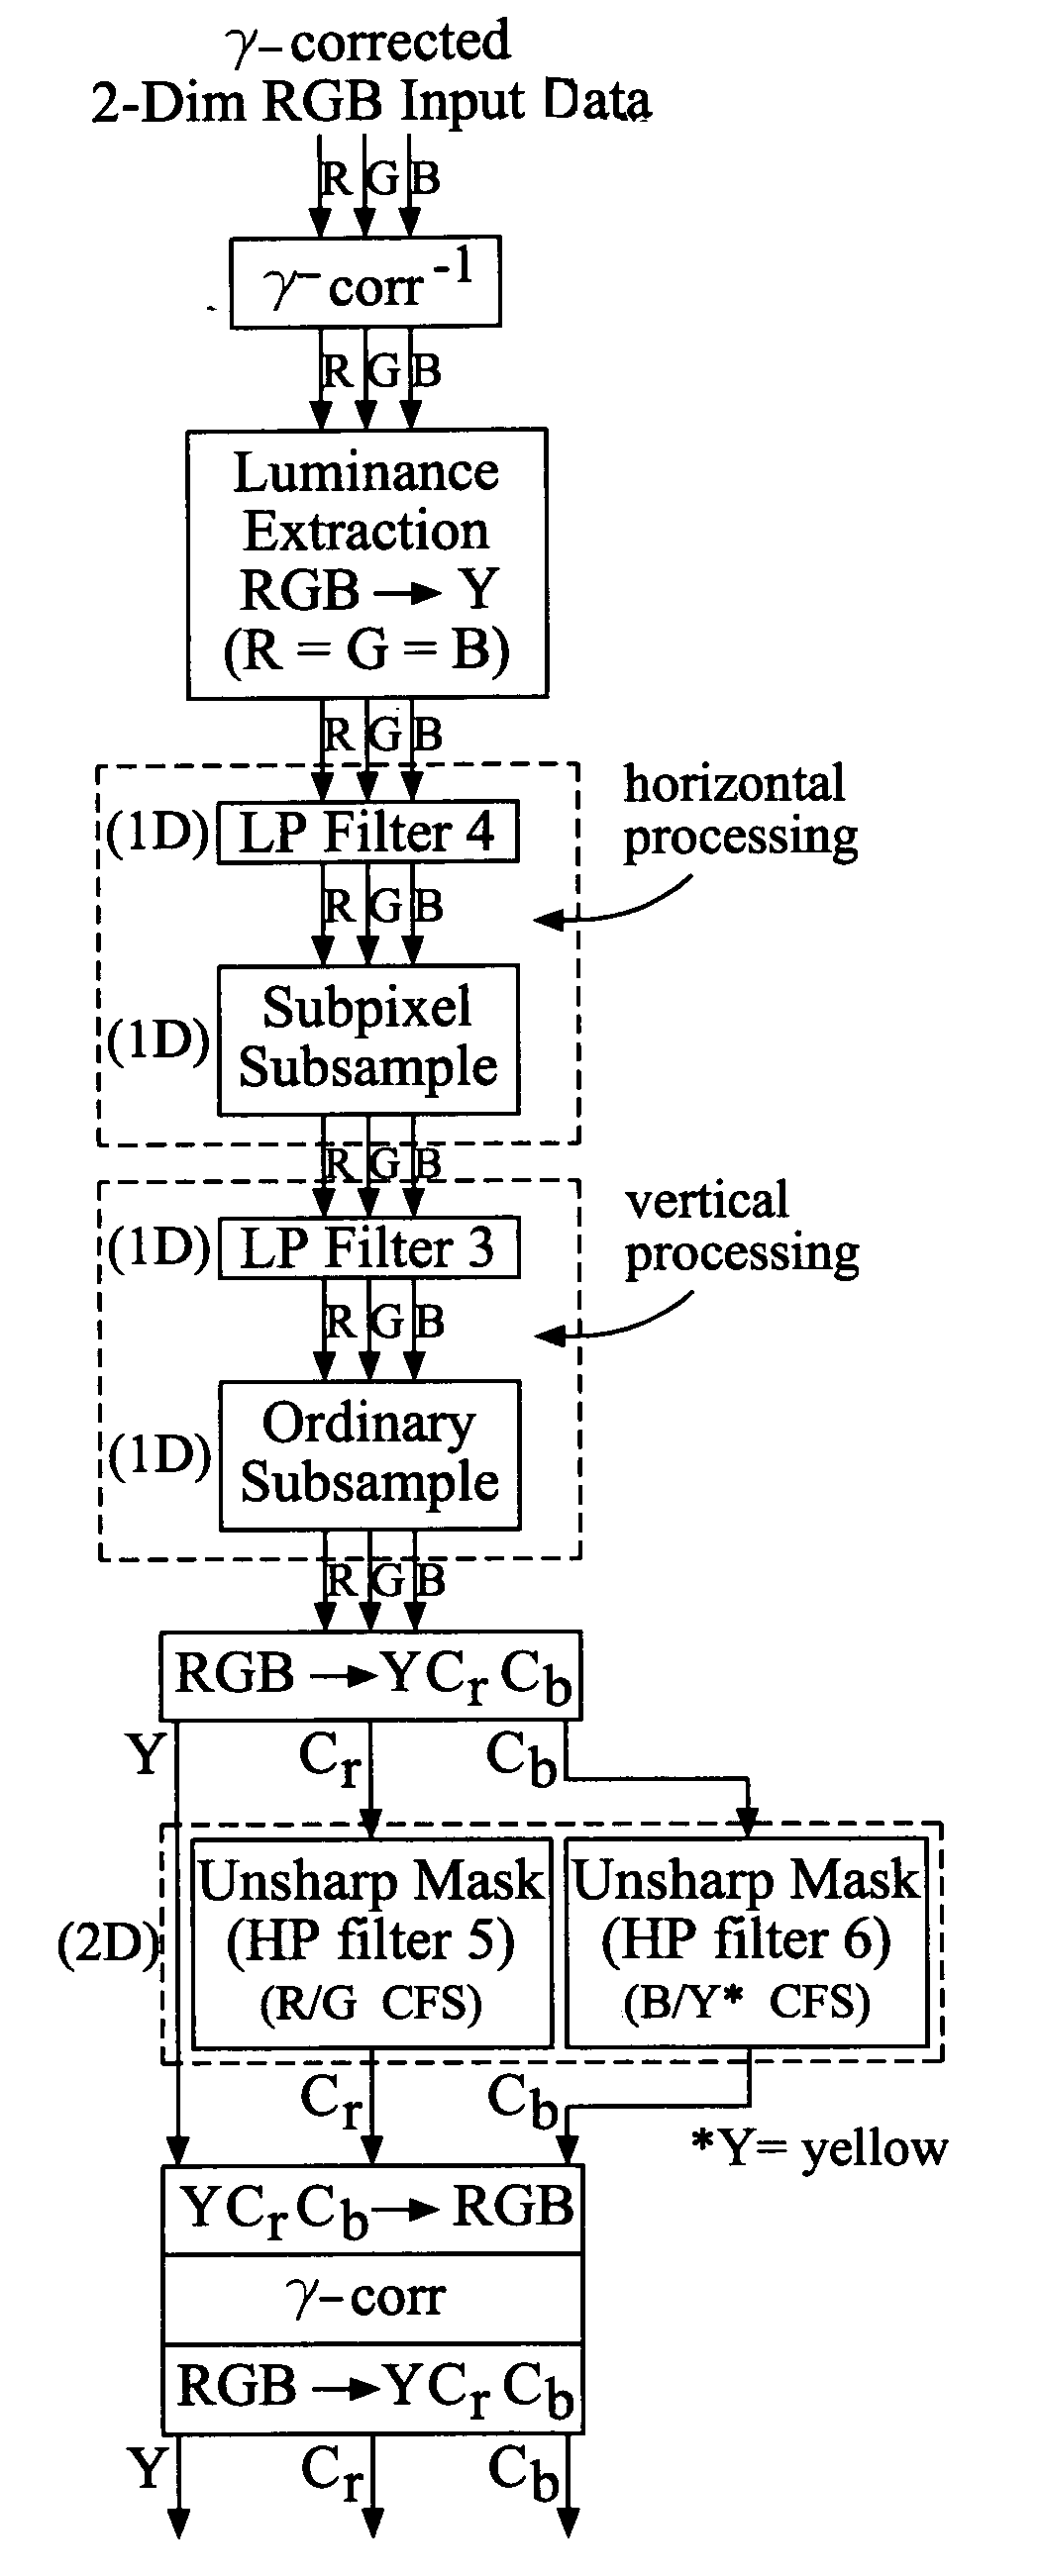 System for improving an image displayed on a display